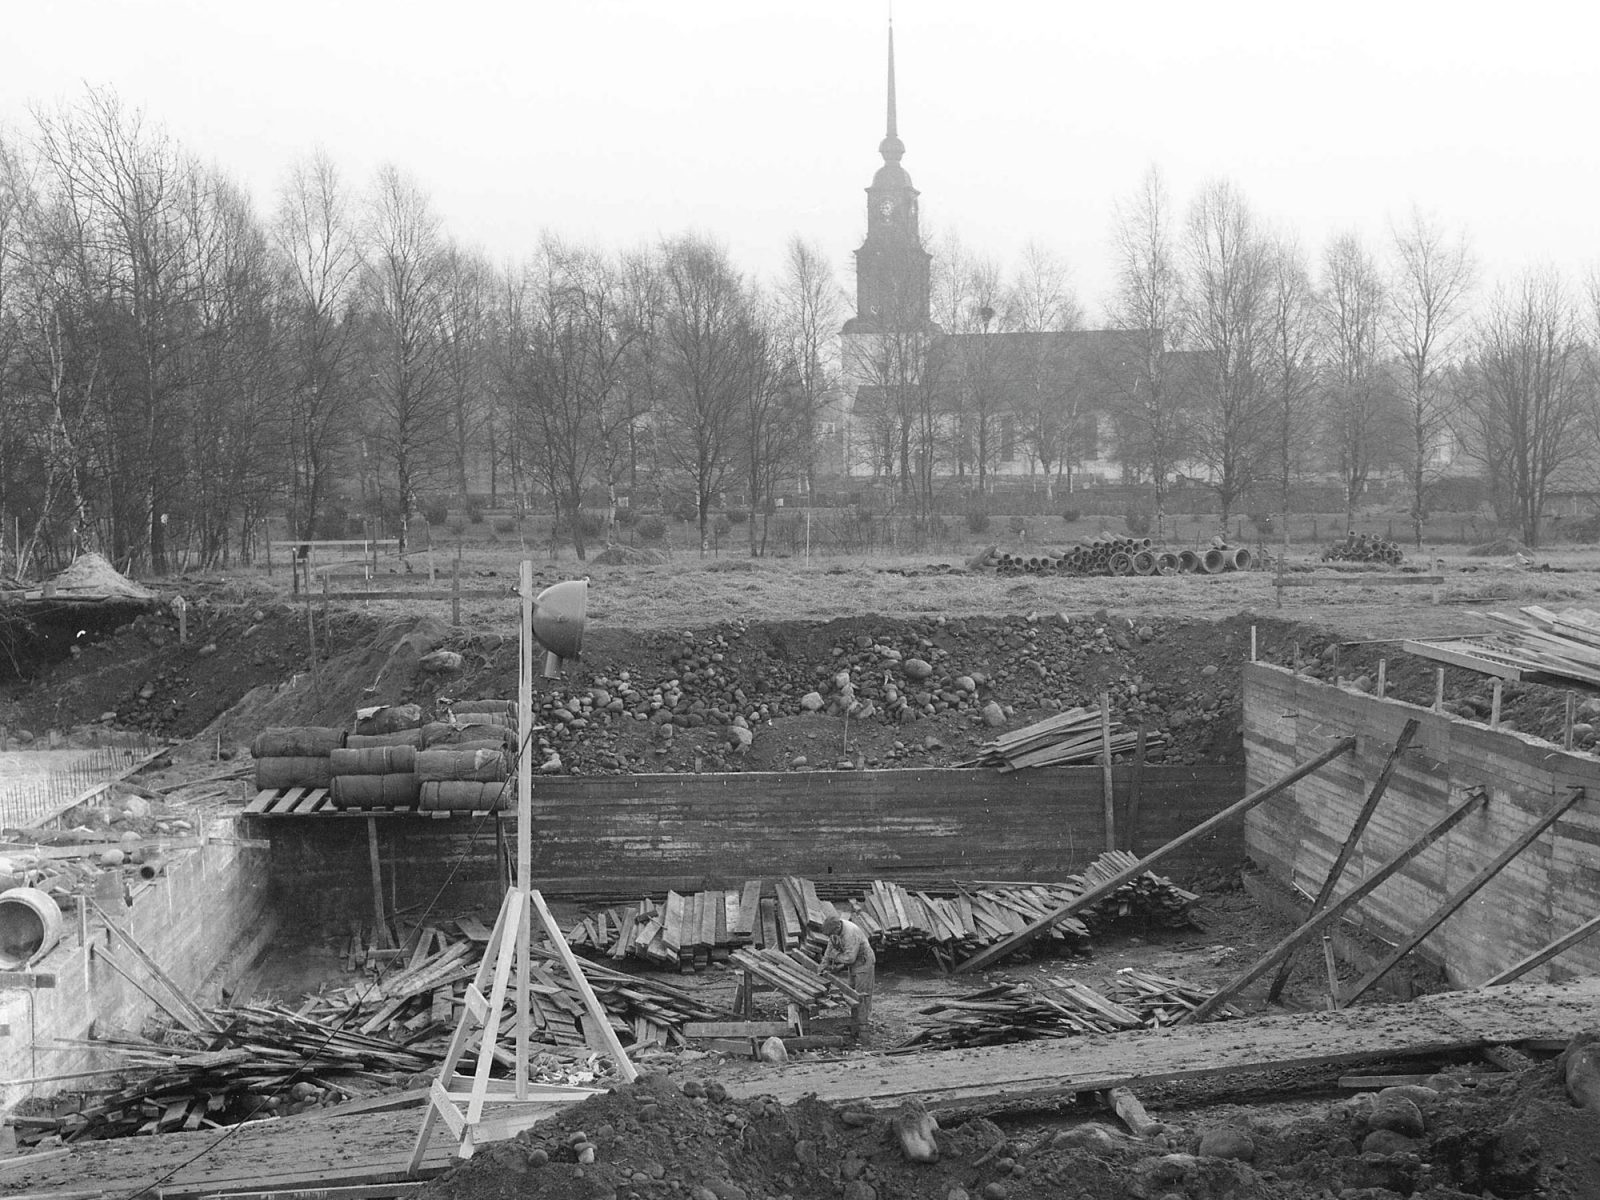 Construction site, large excavation for pool, a church visible in the background.